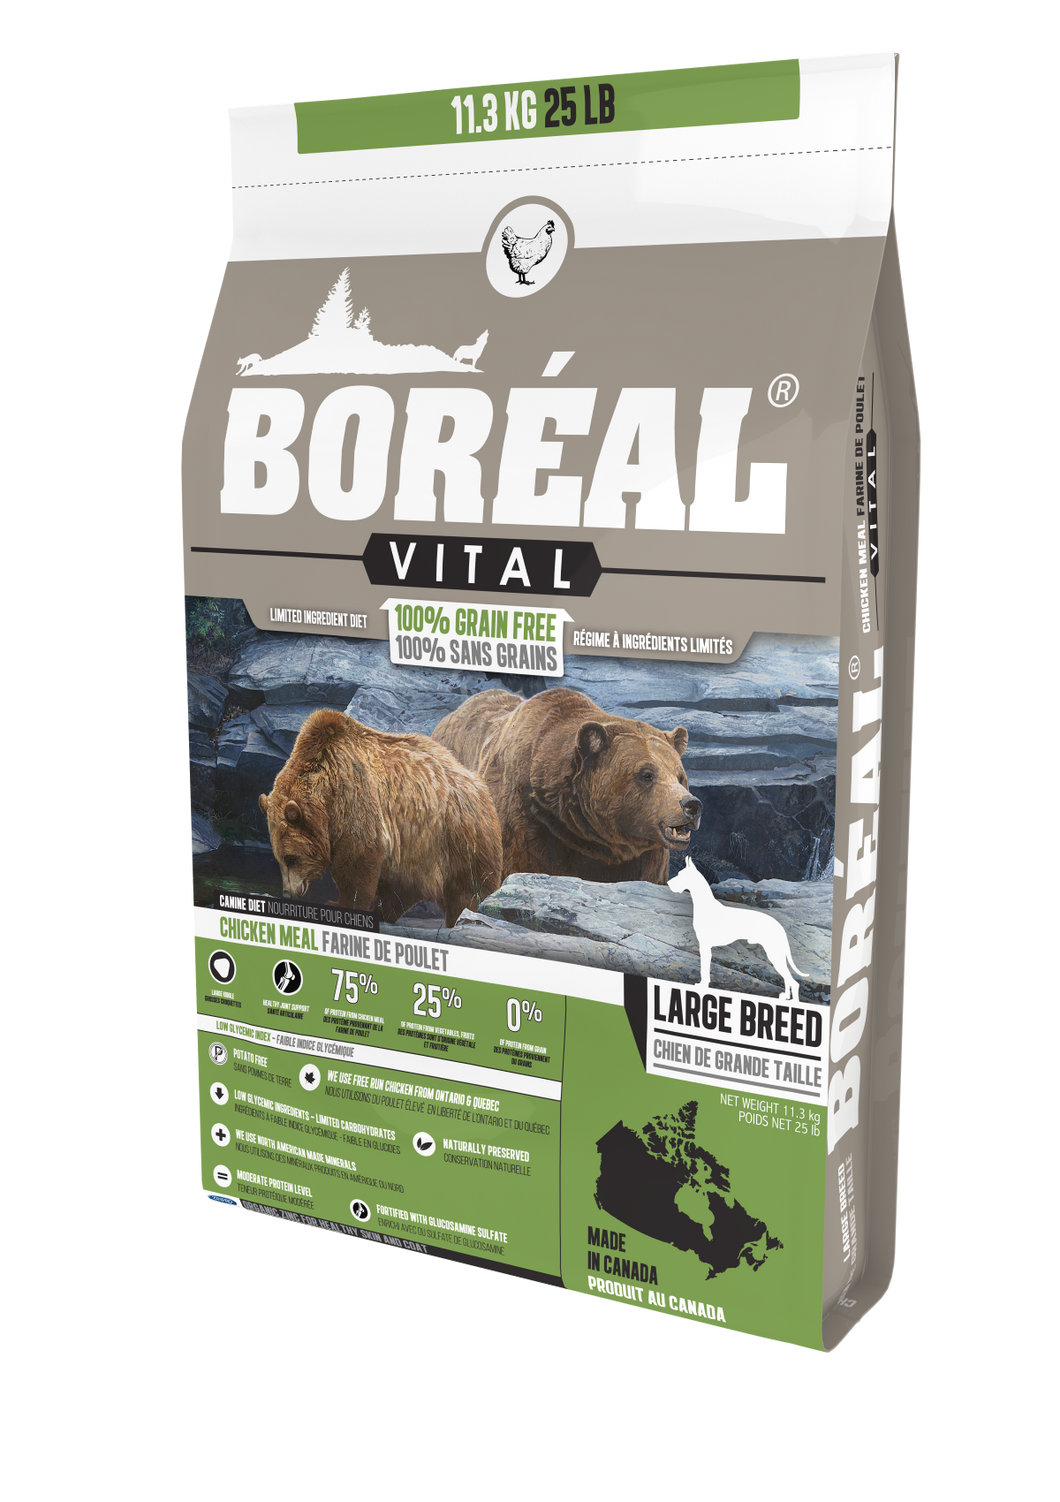 Boréal - Vital Large Breed Chicken Meal Grain Free Dog Food - Limited Ingredient Diet - Joint Support - Large Kibble - Glucosamine Fortified - Ontario & Quebec Free Run Chicken - Low Glycemic - Limited Carbs - North American Made Minerals - Naturally Preserved - Potato Free - Made in Canada